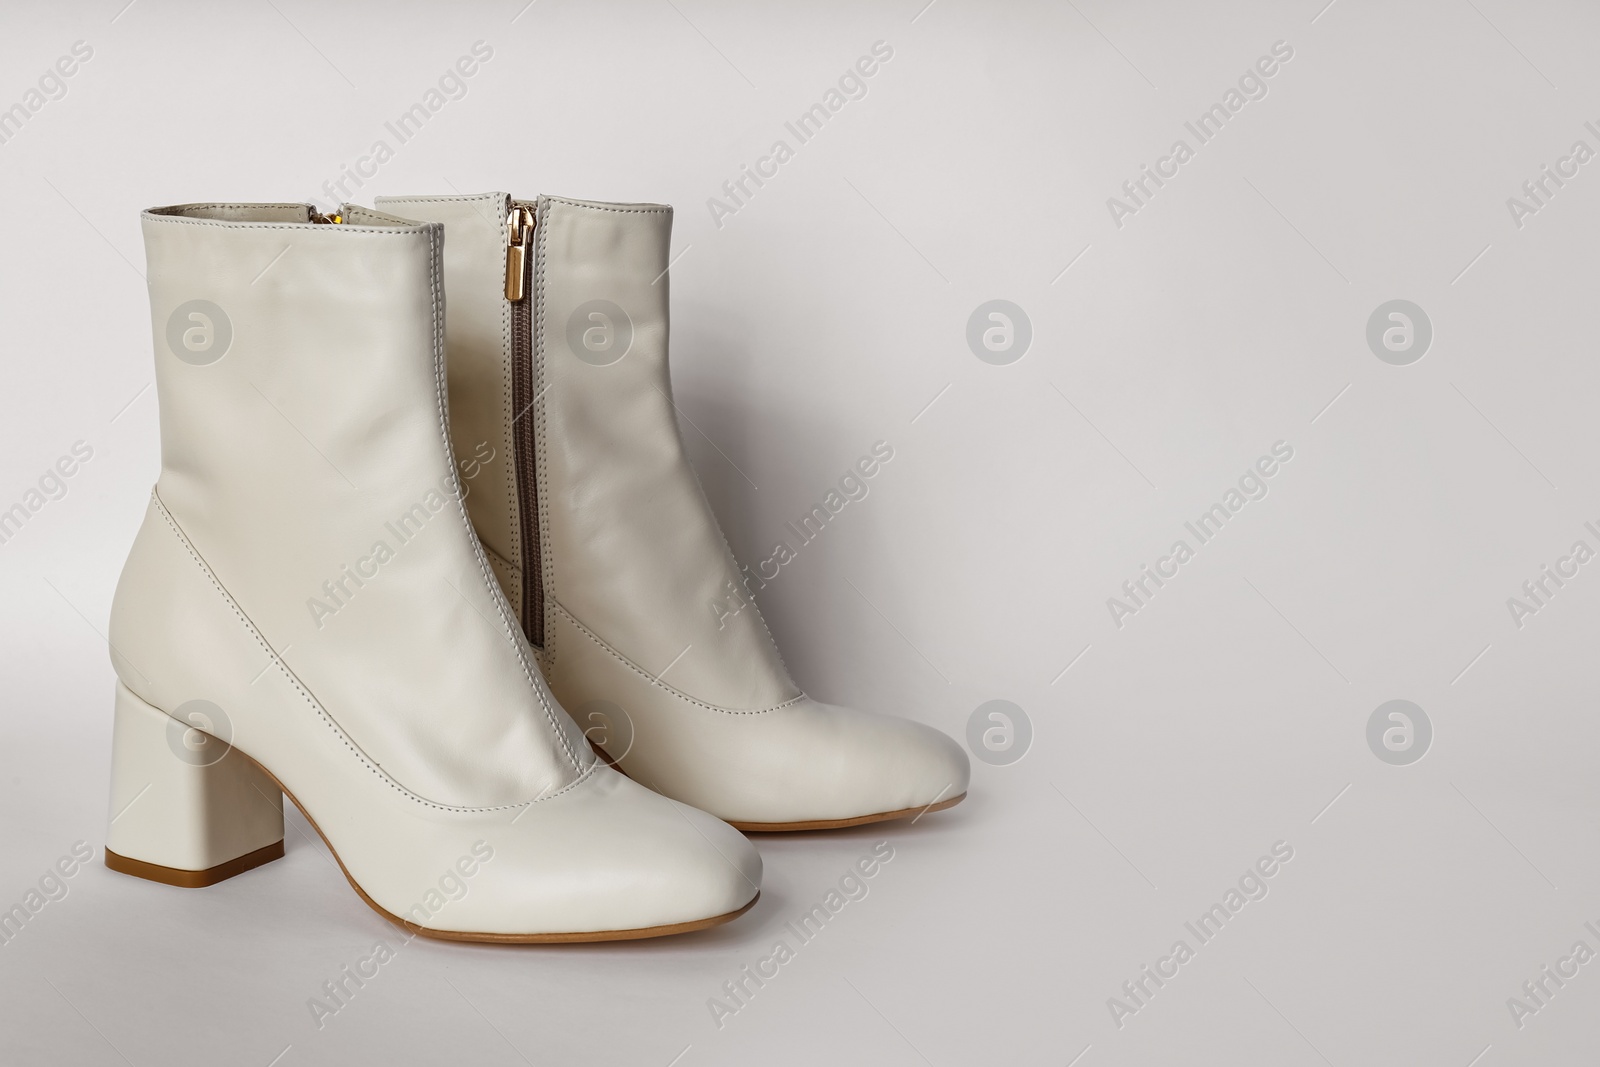 Photo of Pair of stylish leather shoes on white background, space for text